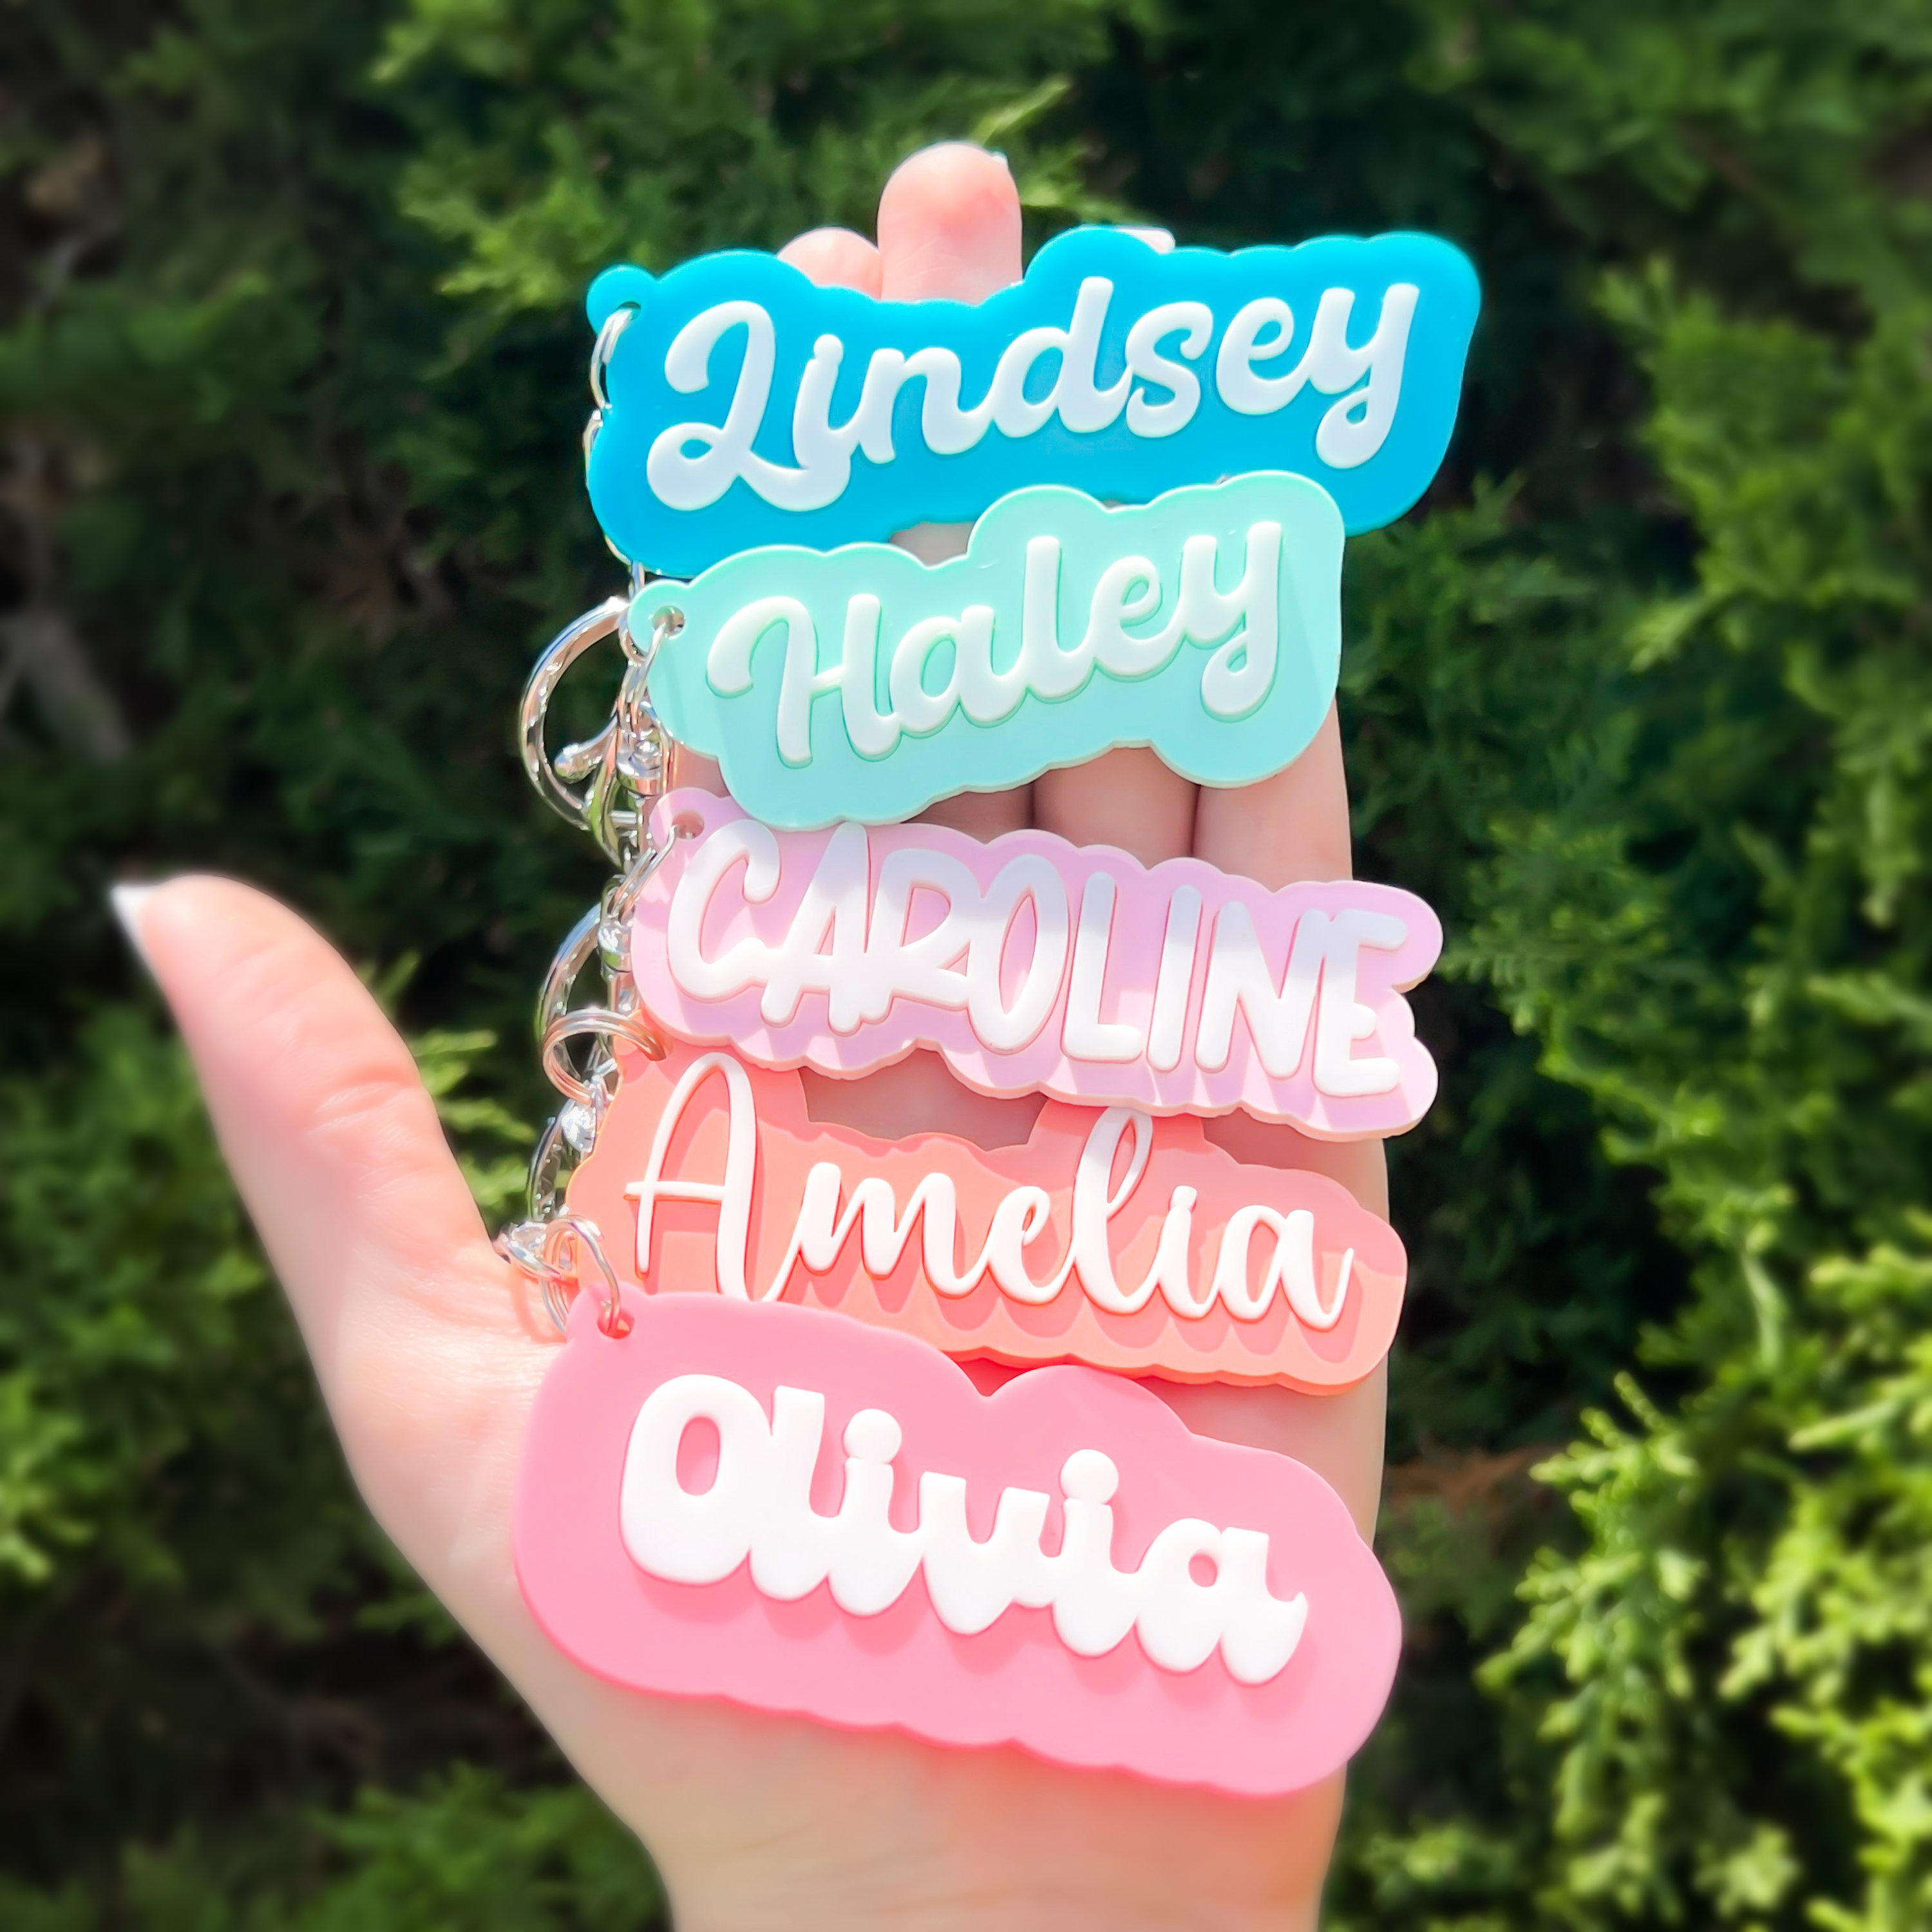 Personalized Round Acrylic Keychain, Custom name for her